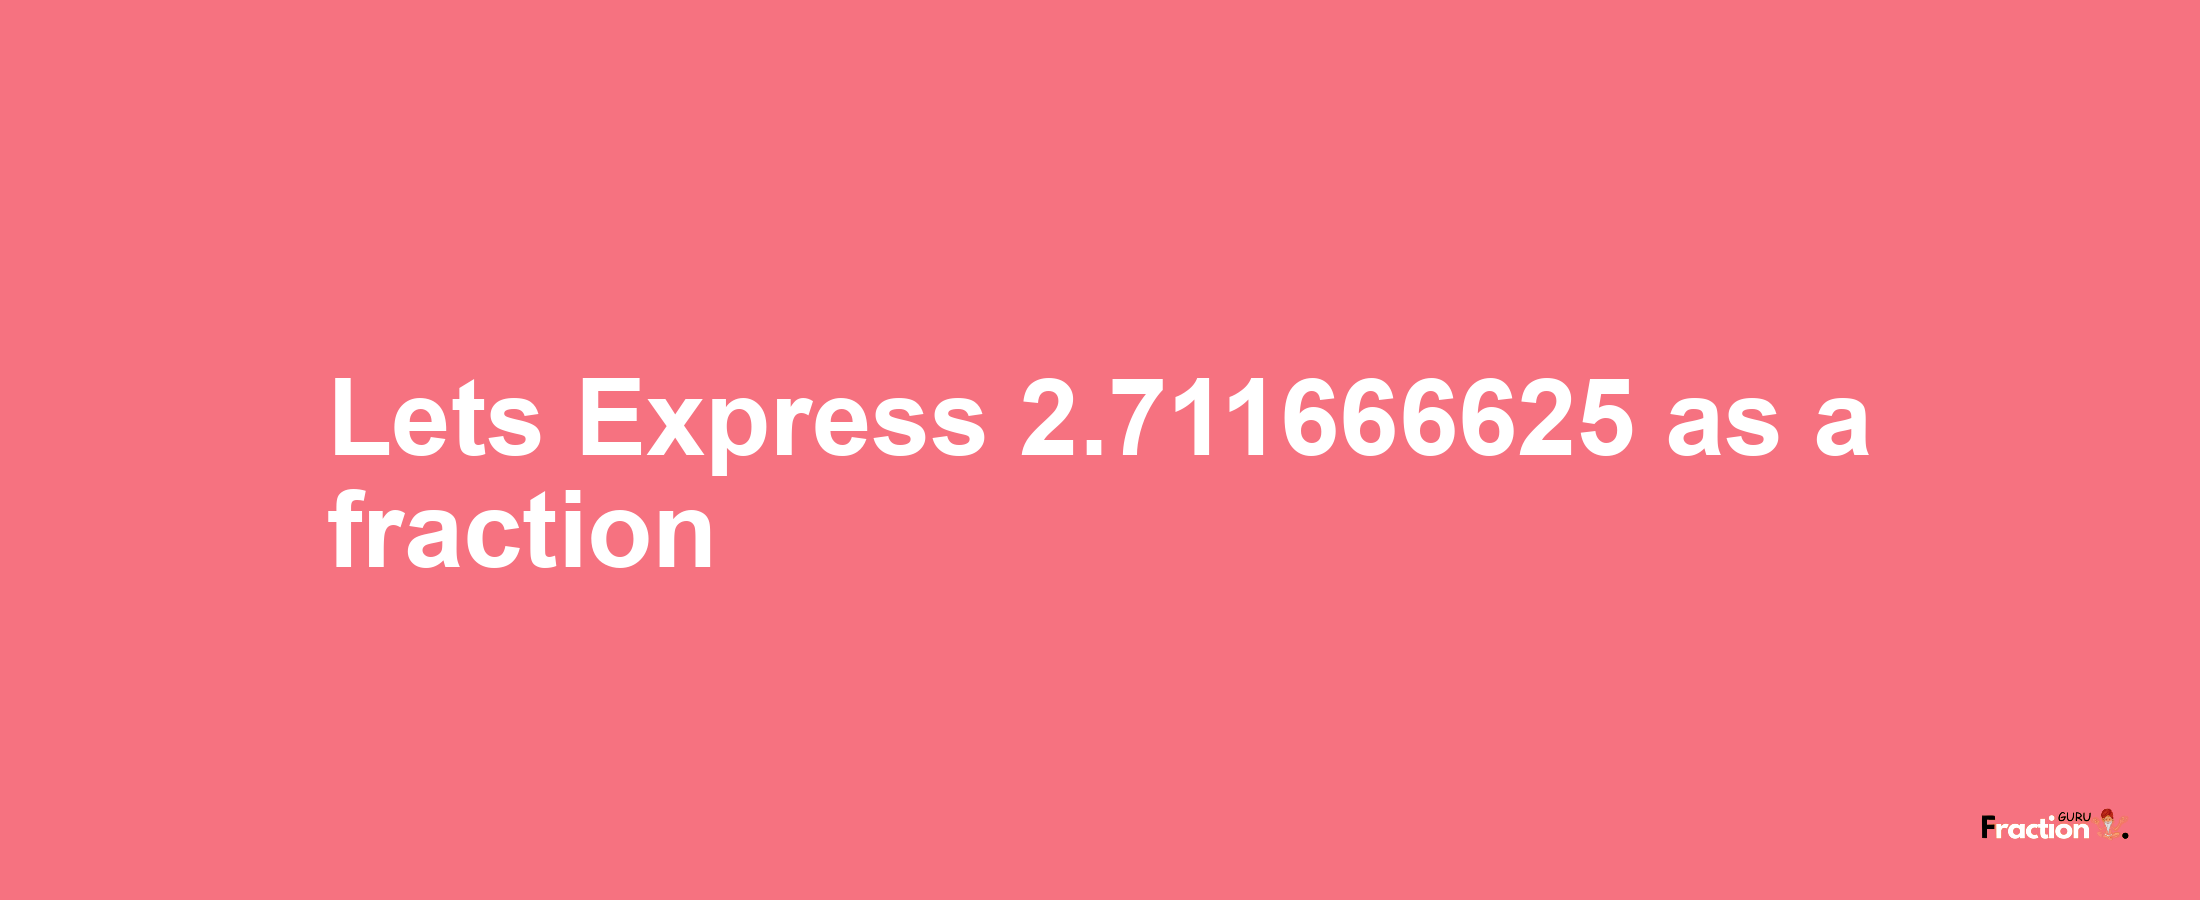 Lets Express 2.711666625 as afraction